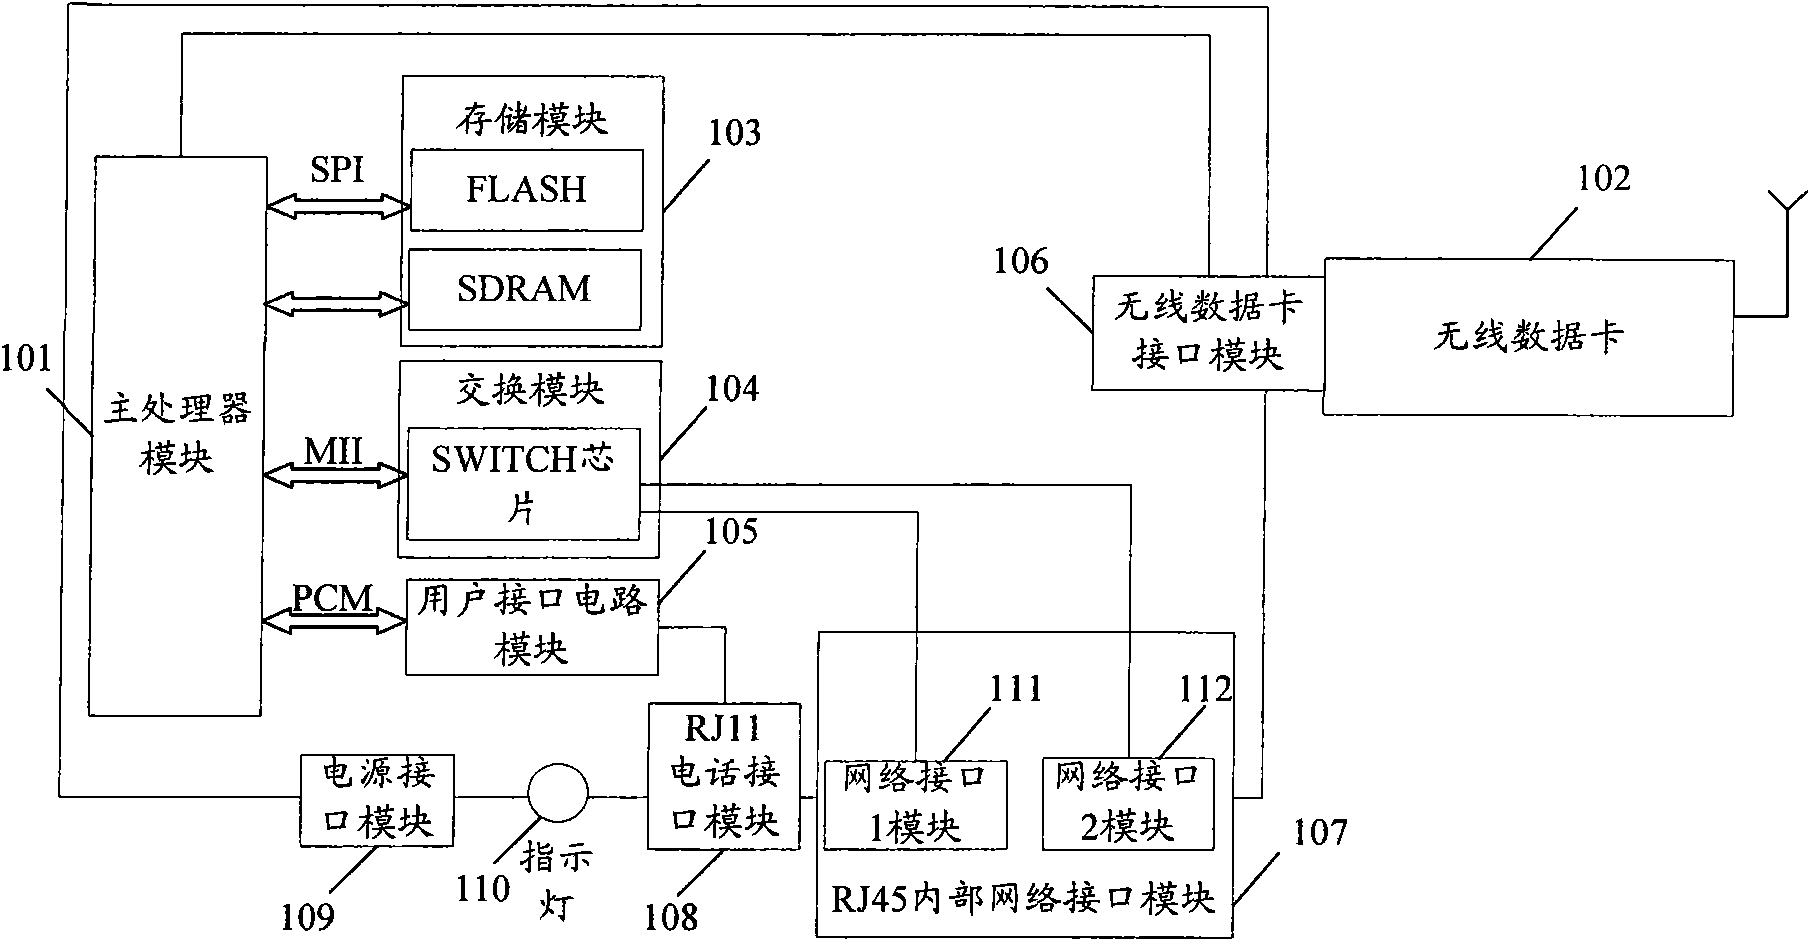 Method and device for automatically adapting to wireless data cards with multiple formats